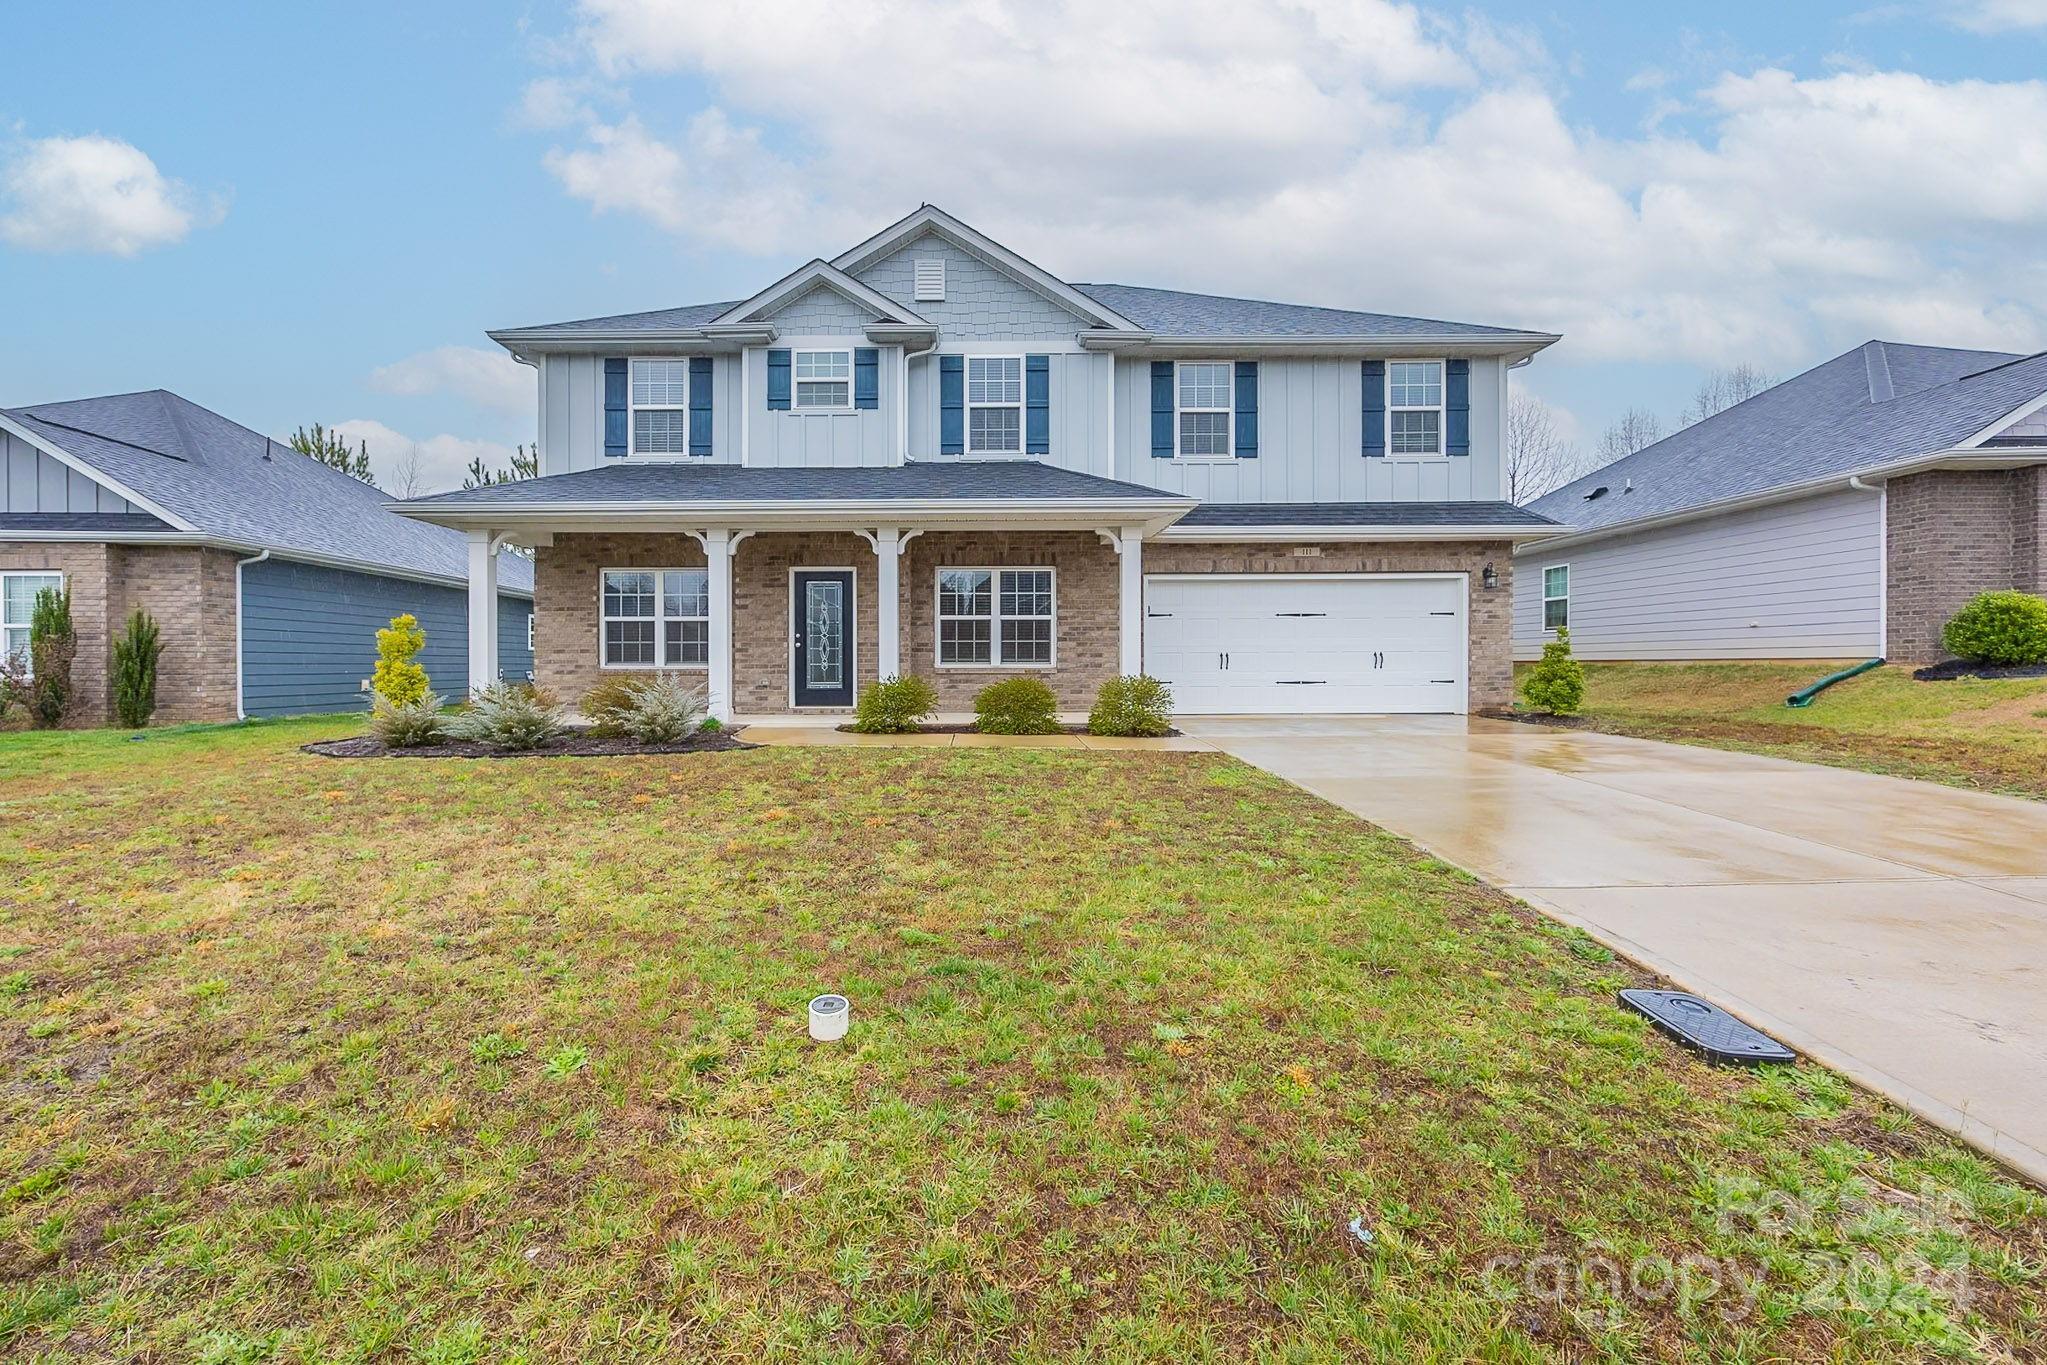 Photo one of 111 Bunker Hill Ln # 65 Statesville NC 28677 | MLS 4118055